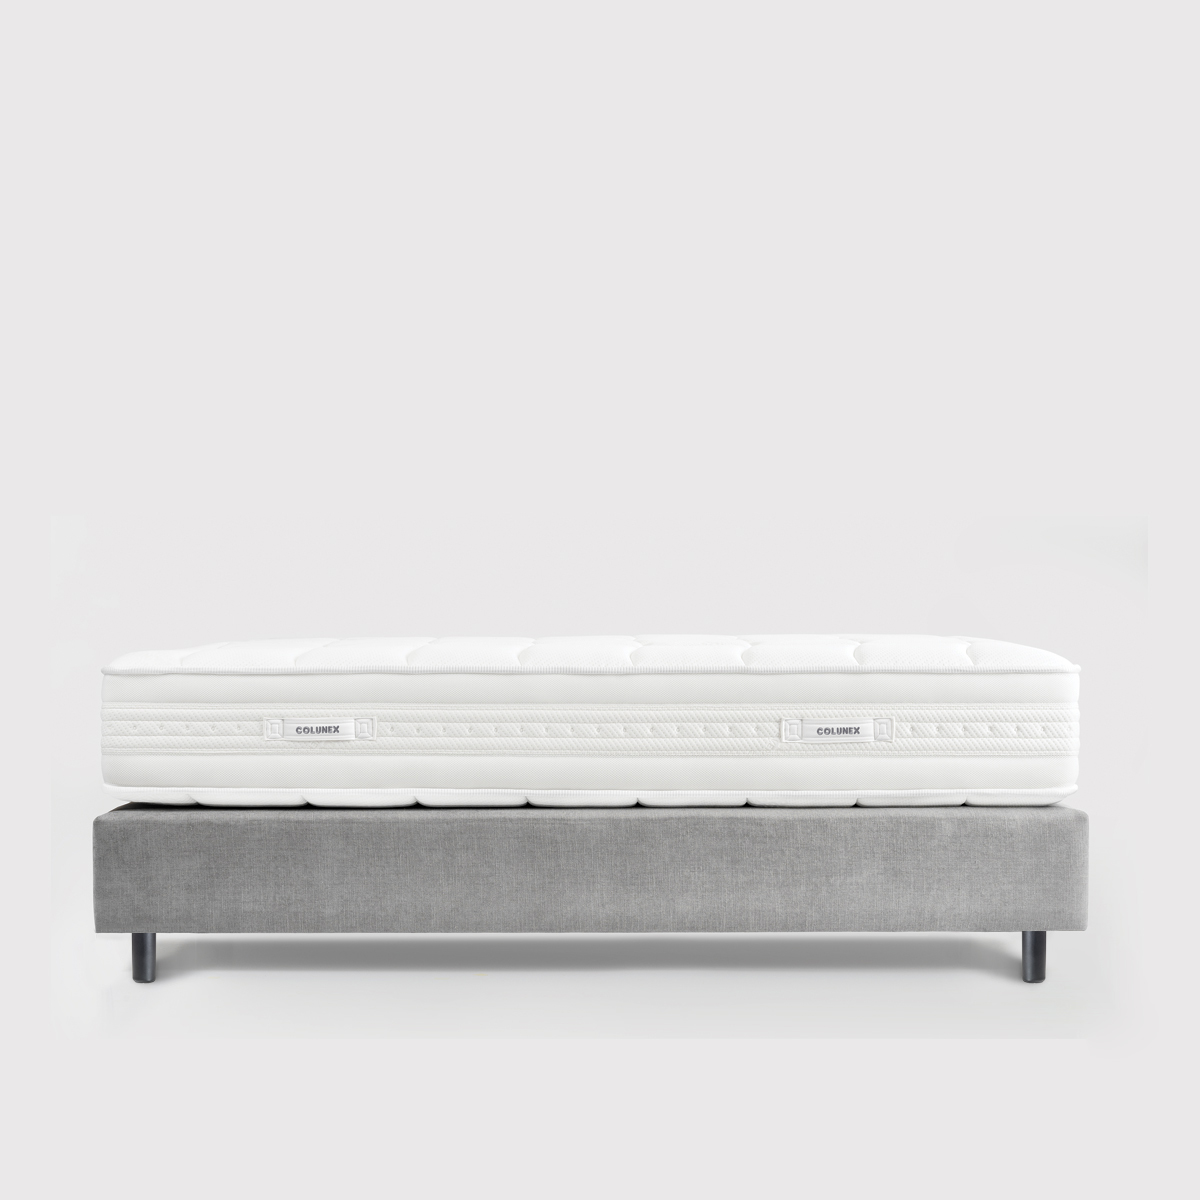 Sommier Alfa A – Bed Base (One Piece)